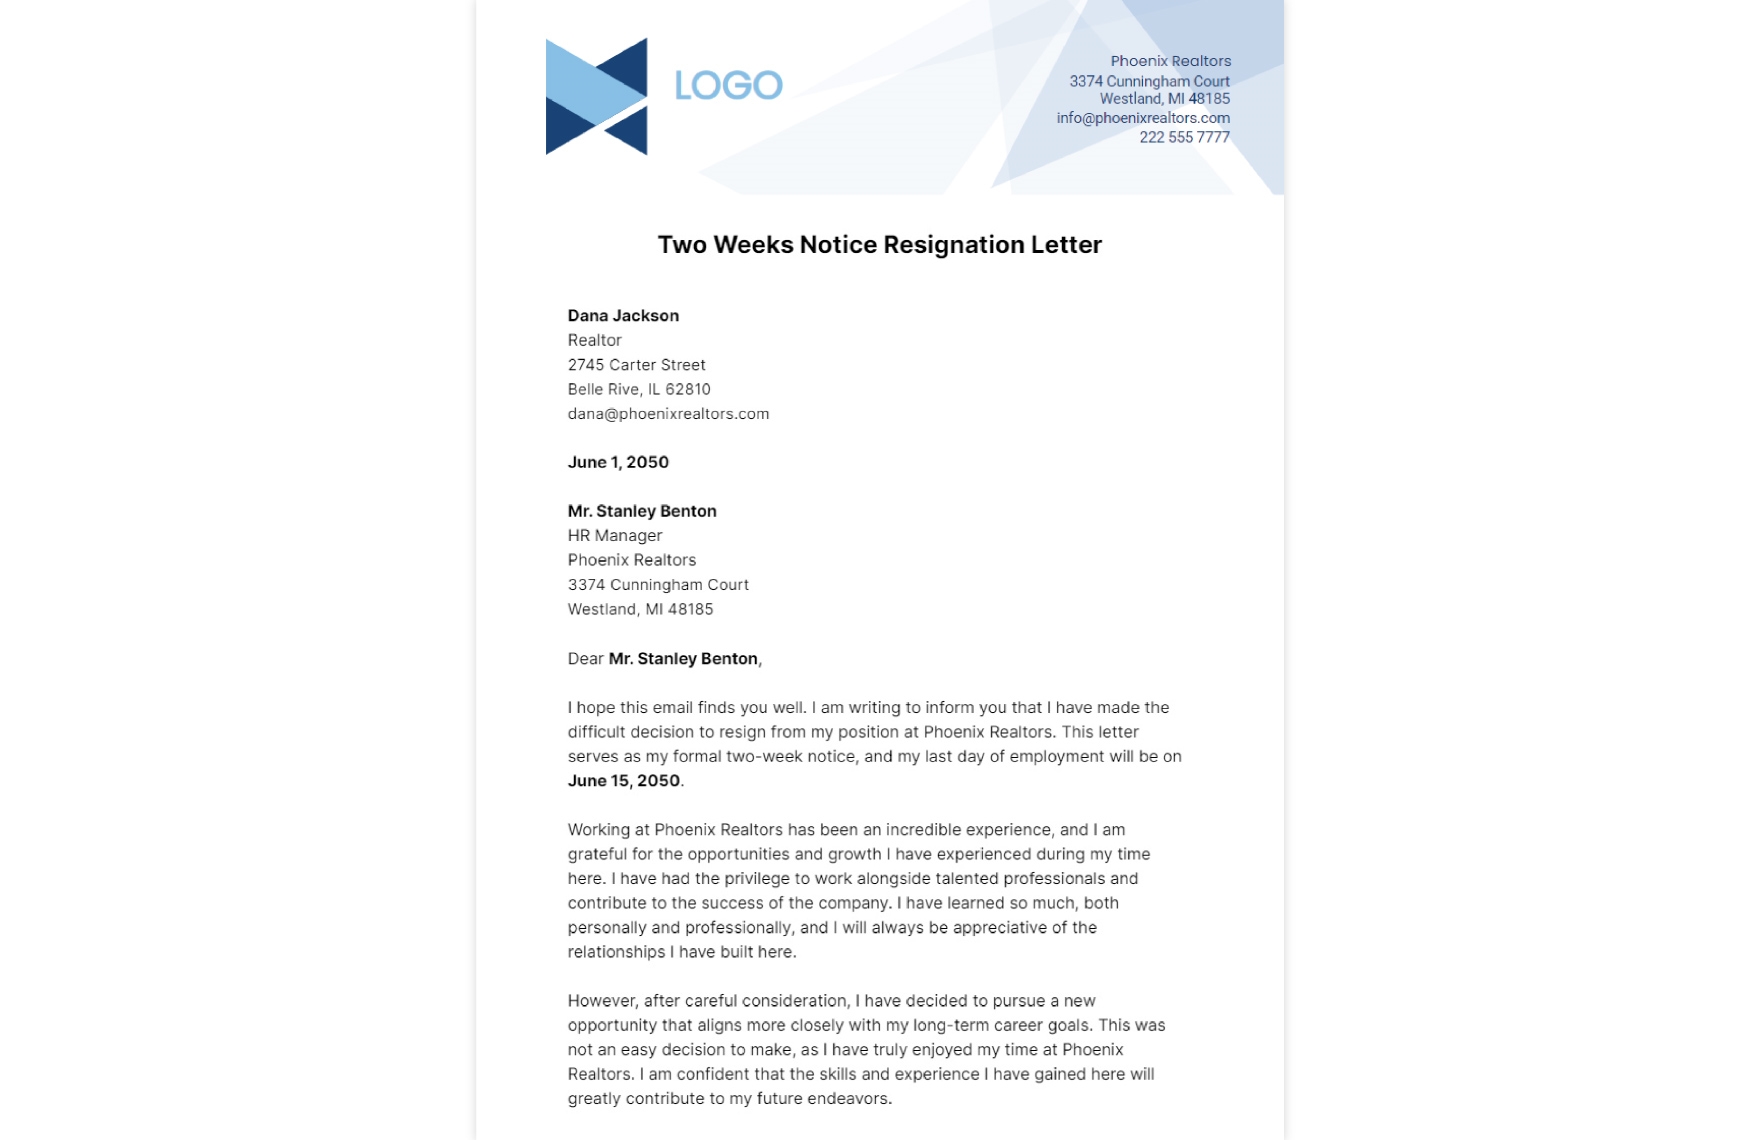 Two Weeks' Notice Resignation Letter Template